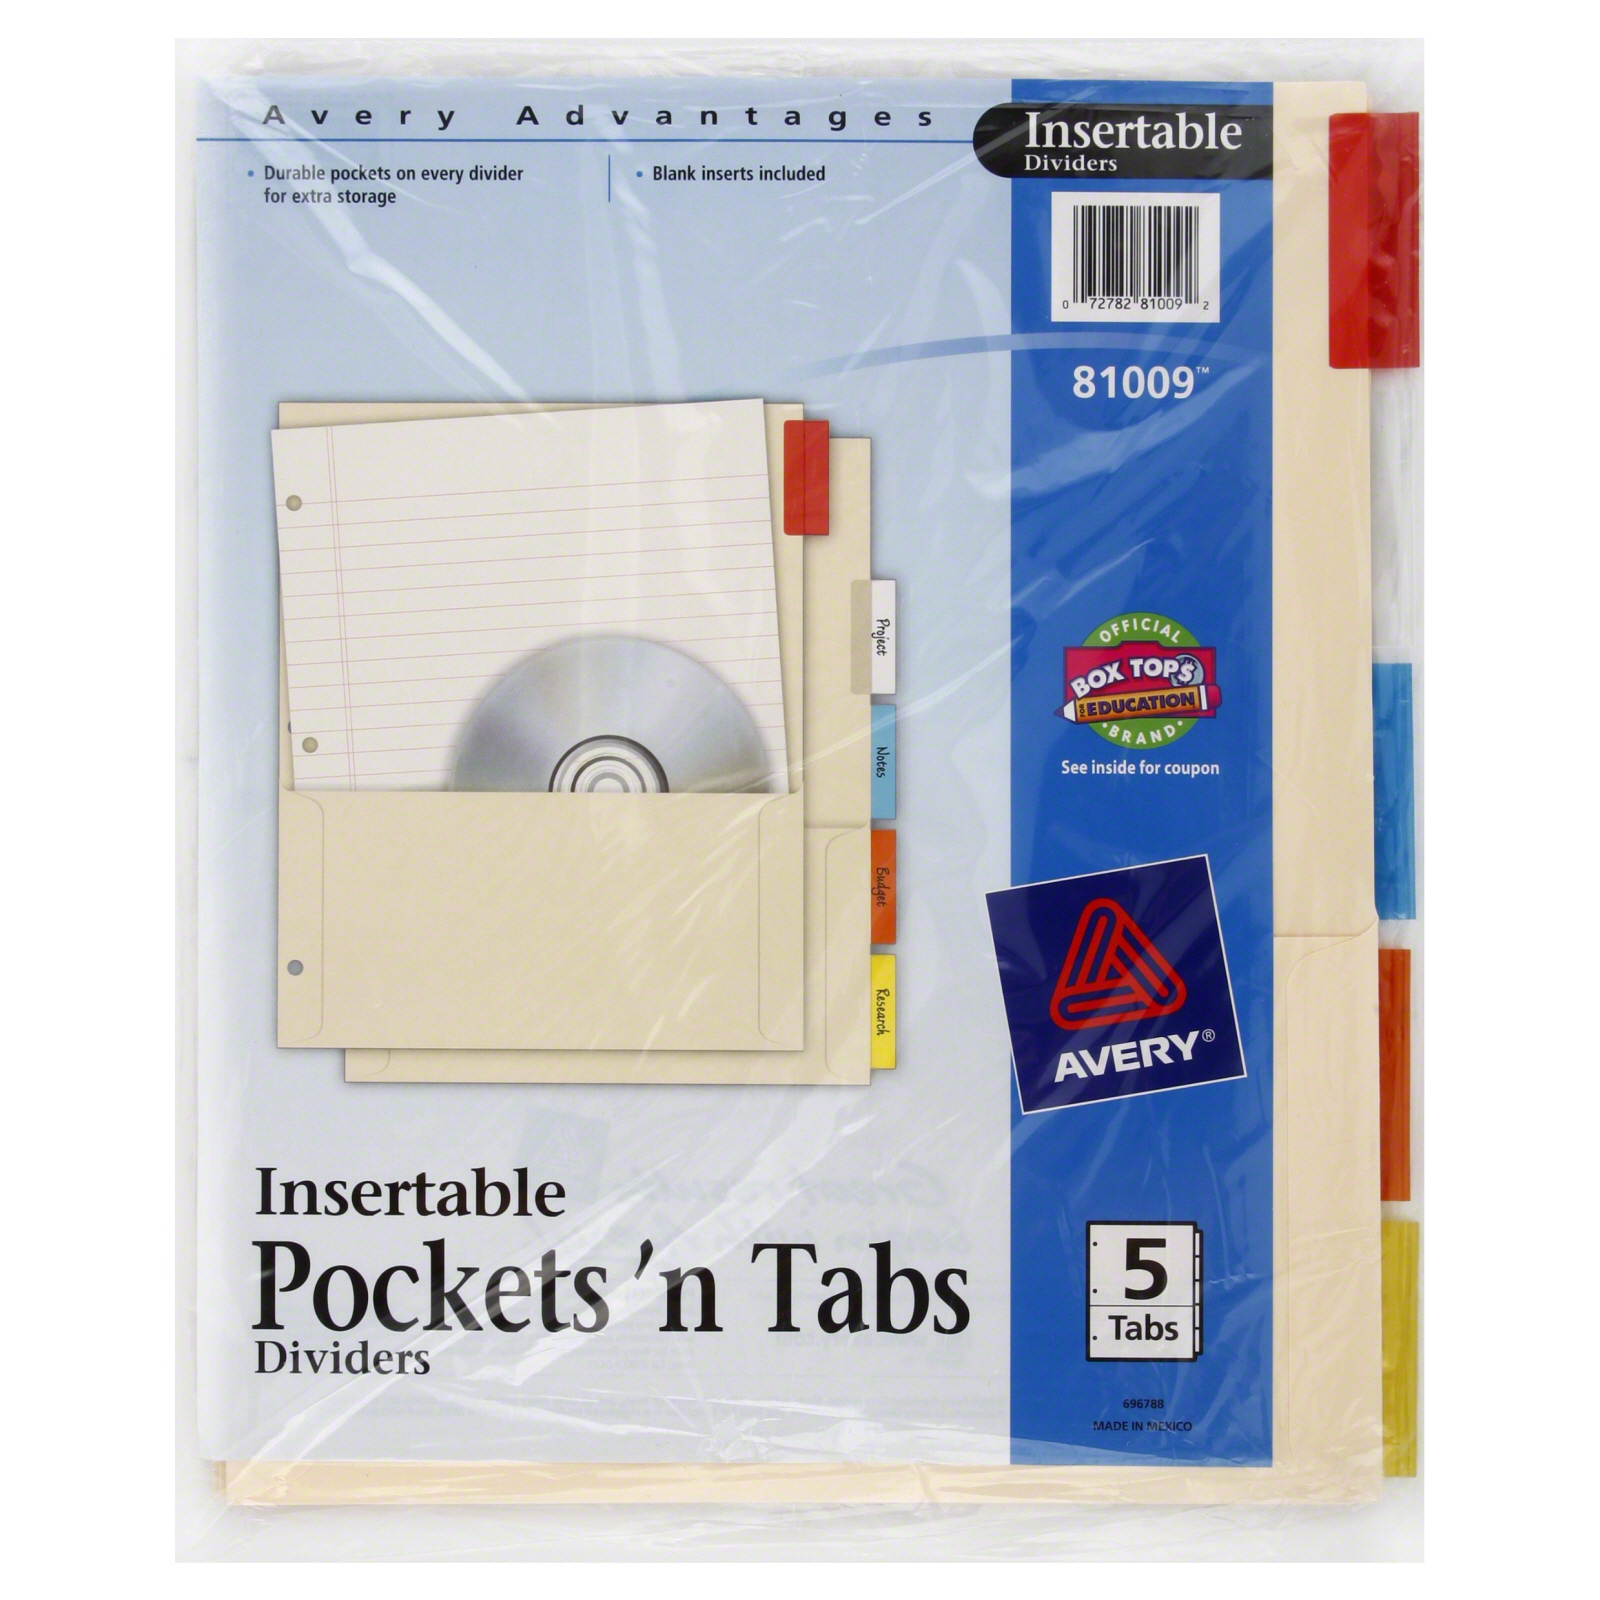 Avery Pockets & Tabs Insertable Dividers